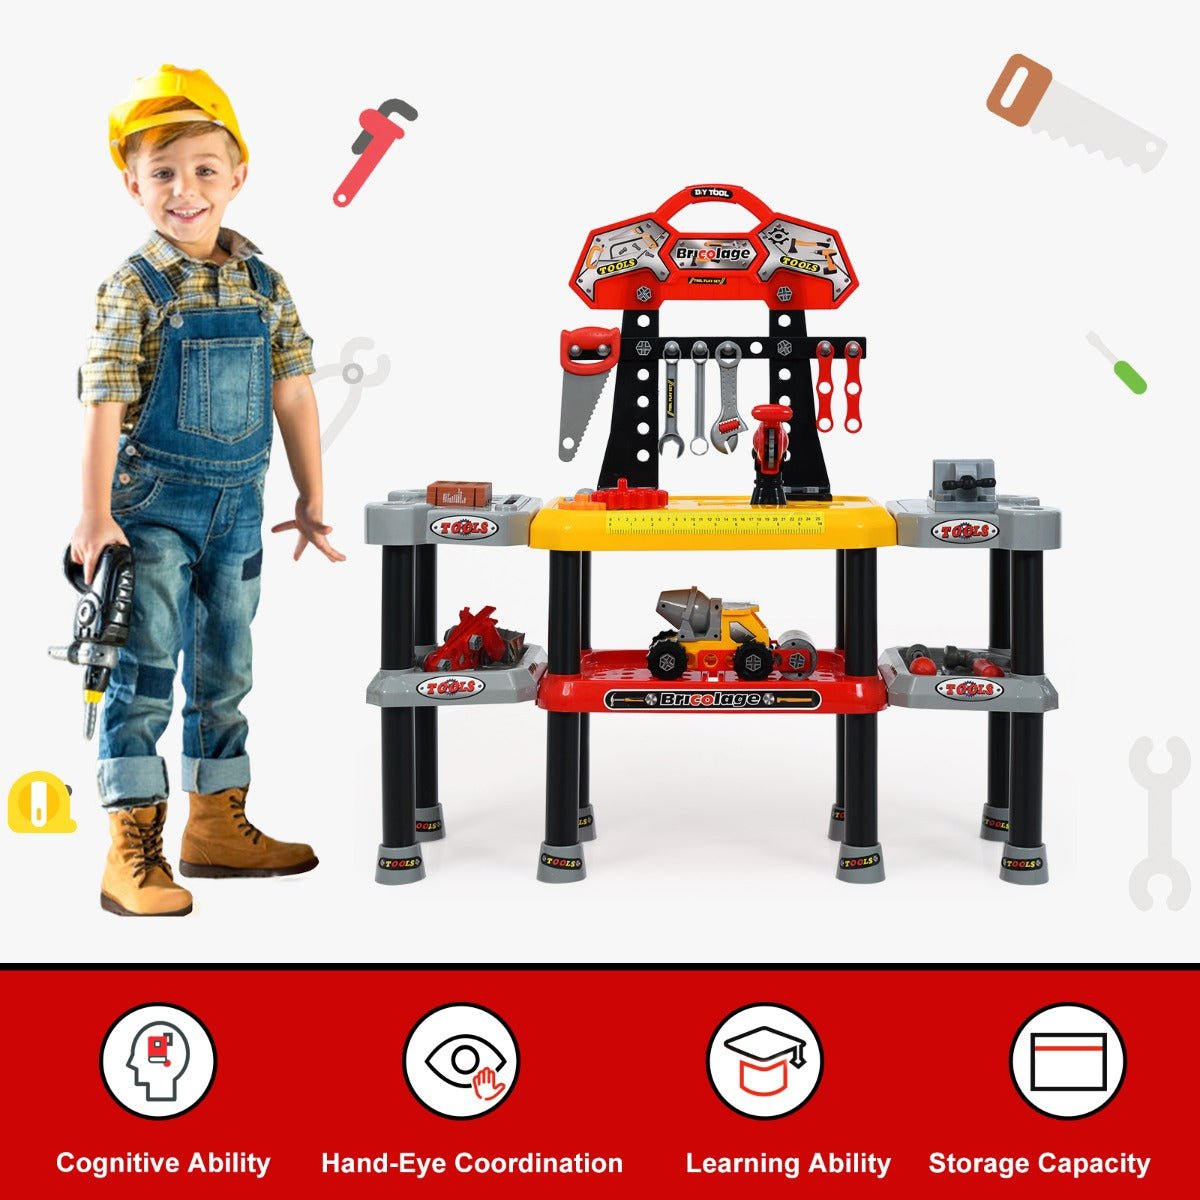 Tool Time Adventure: 121 PCS Toy Tool Set with Double-Tier Design